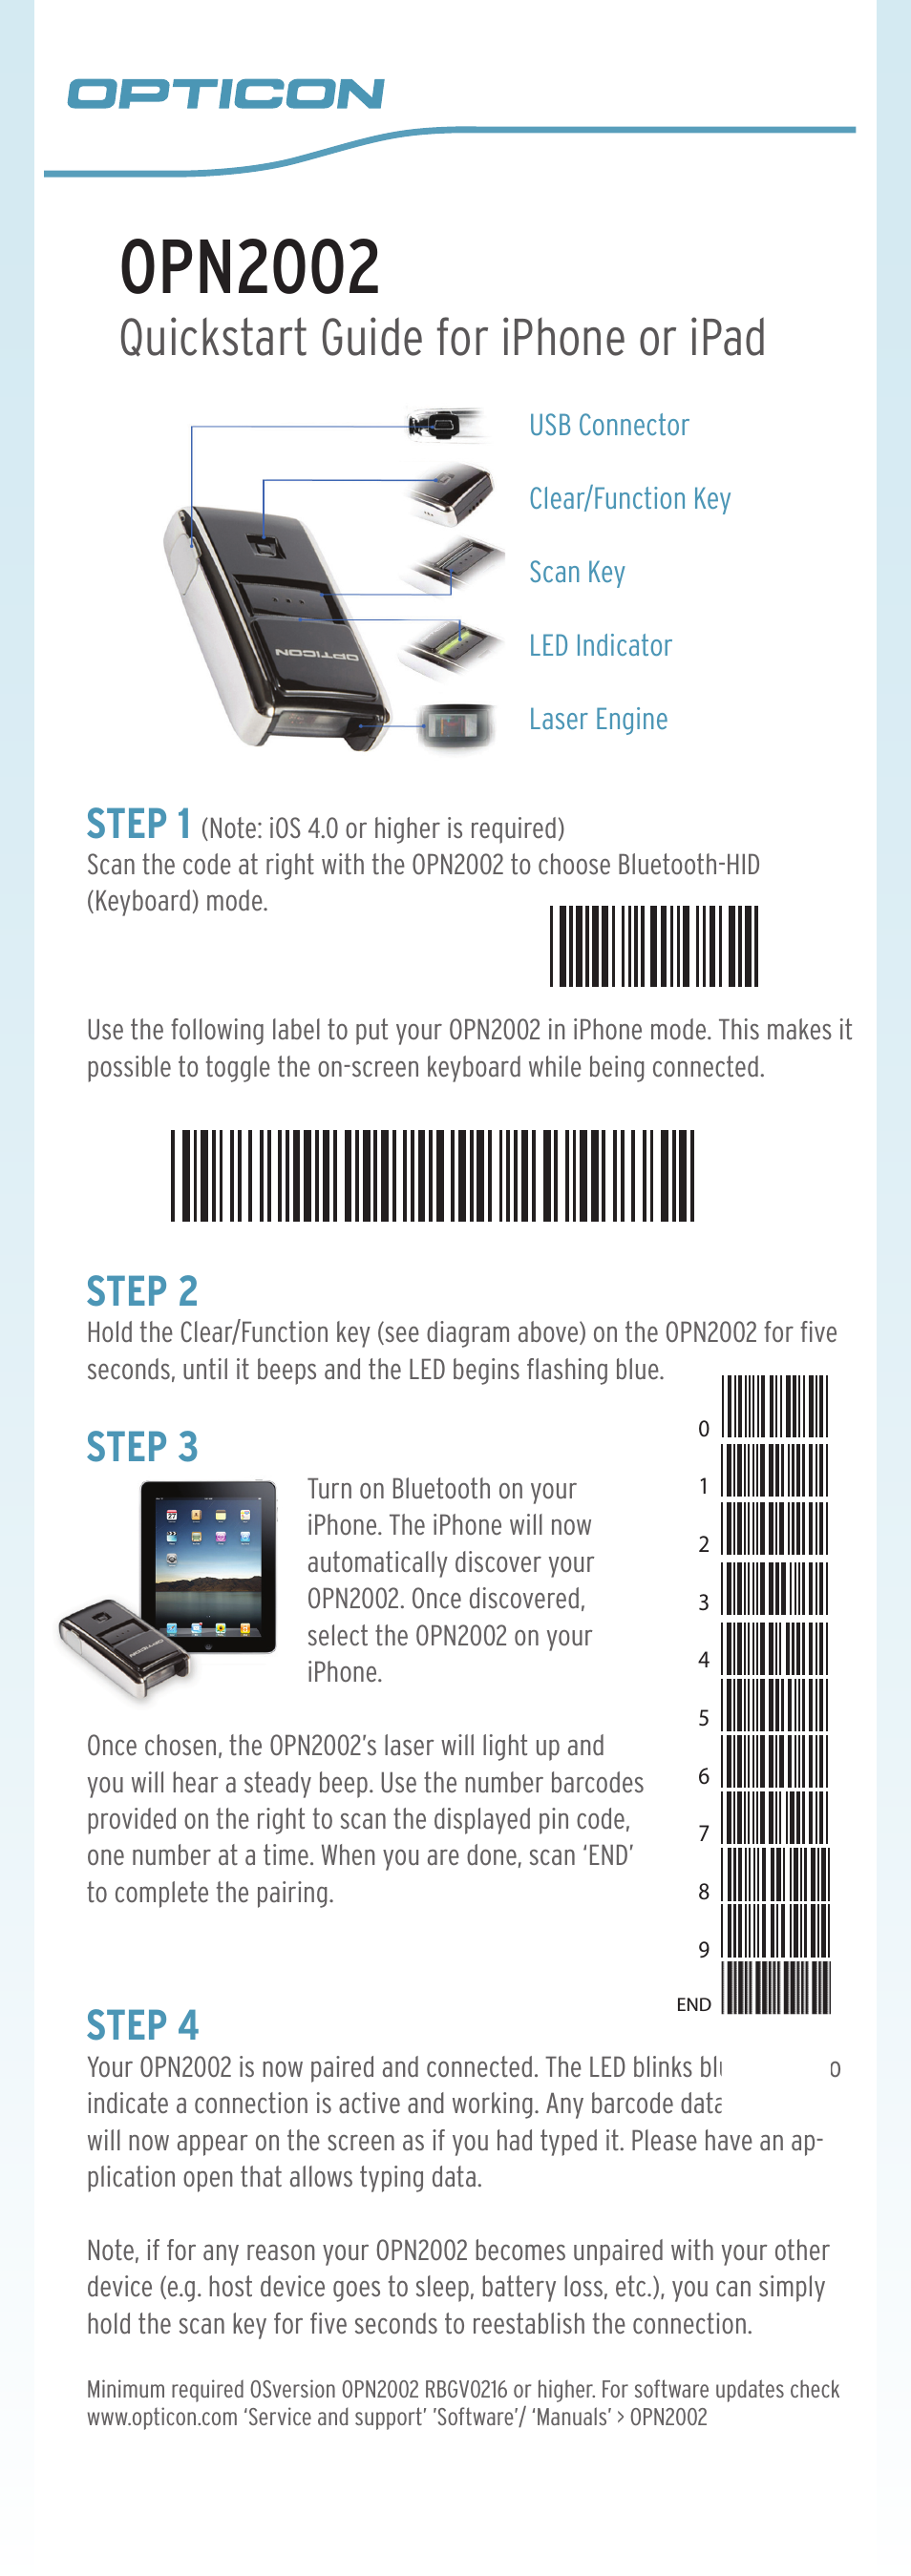 OPN 2002 Quickstart Guide for iPhone or iPad